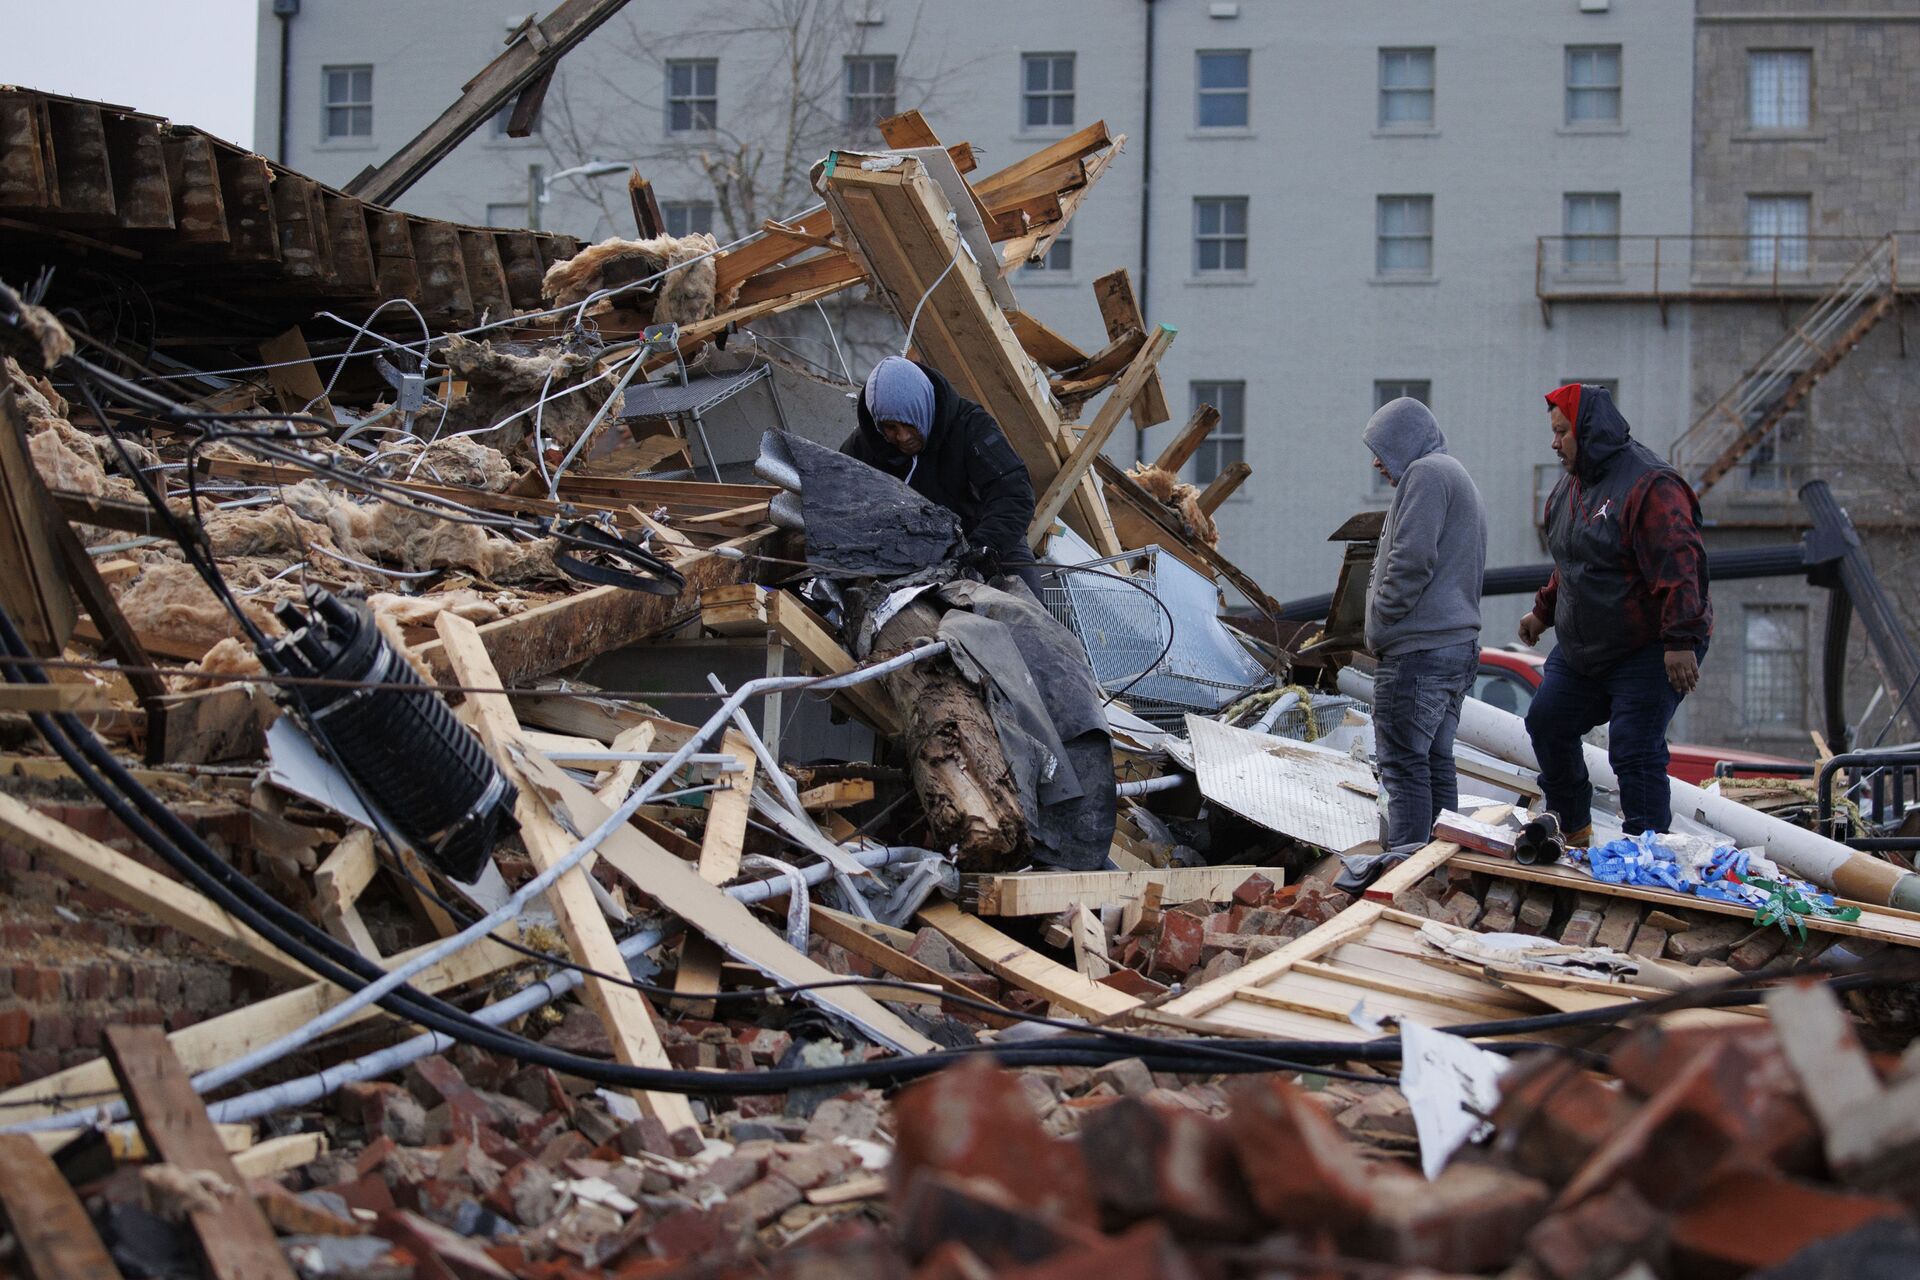 People search through a tornado-damaged building on 11 December 2021 in Mayfield, Kentucky. Multiple tornadoes tore through parts of the lower Midwest late on Friday night leaving a large path of destruction and unknown fatalities.   - Sputnik International, 1920, 14.12.2021